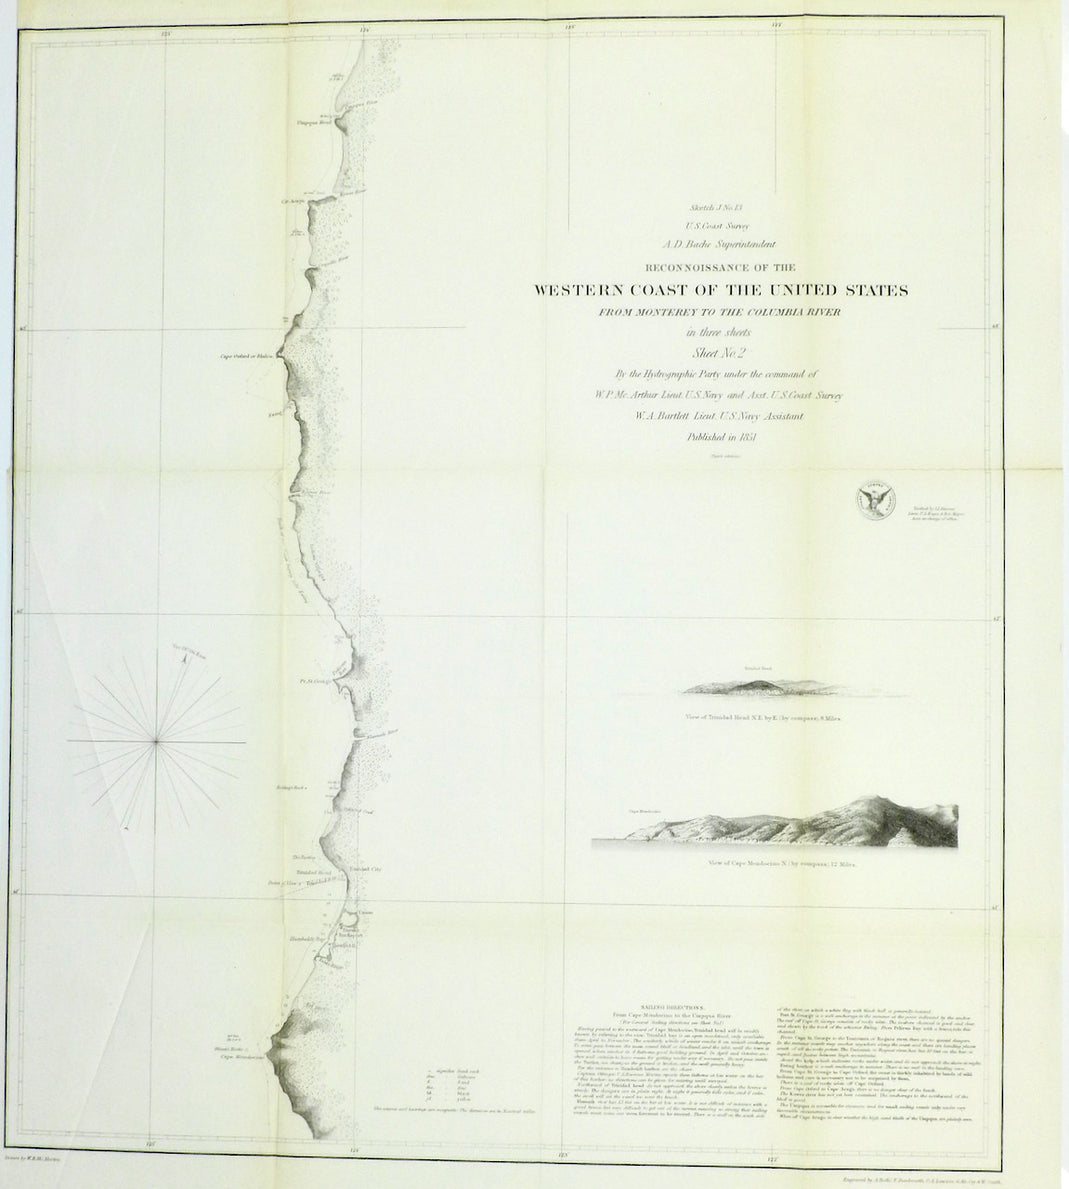 WESTERN COAST OF THE UNITED STATES  3 SHEETS